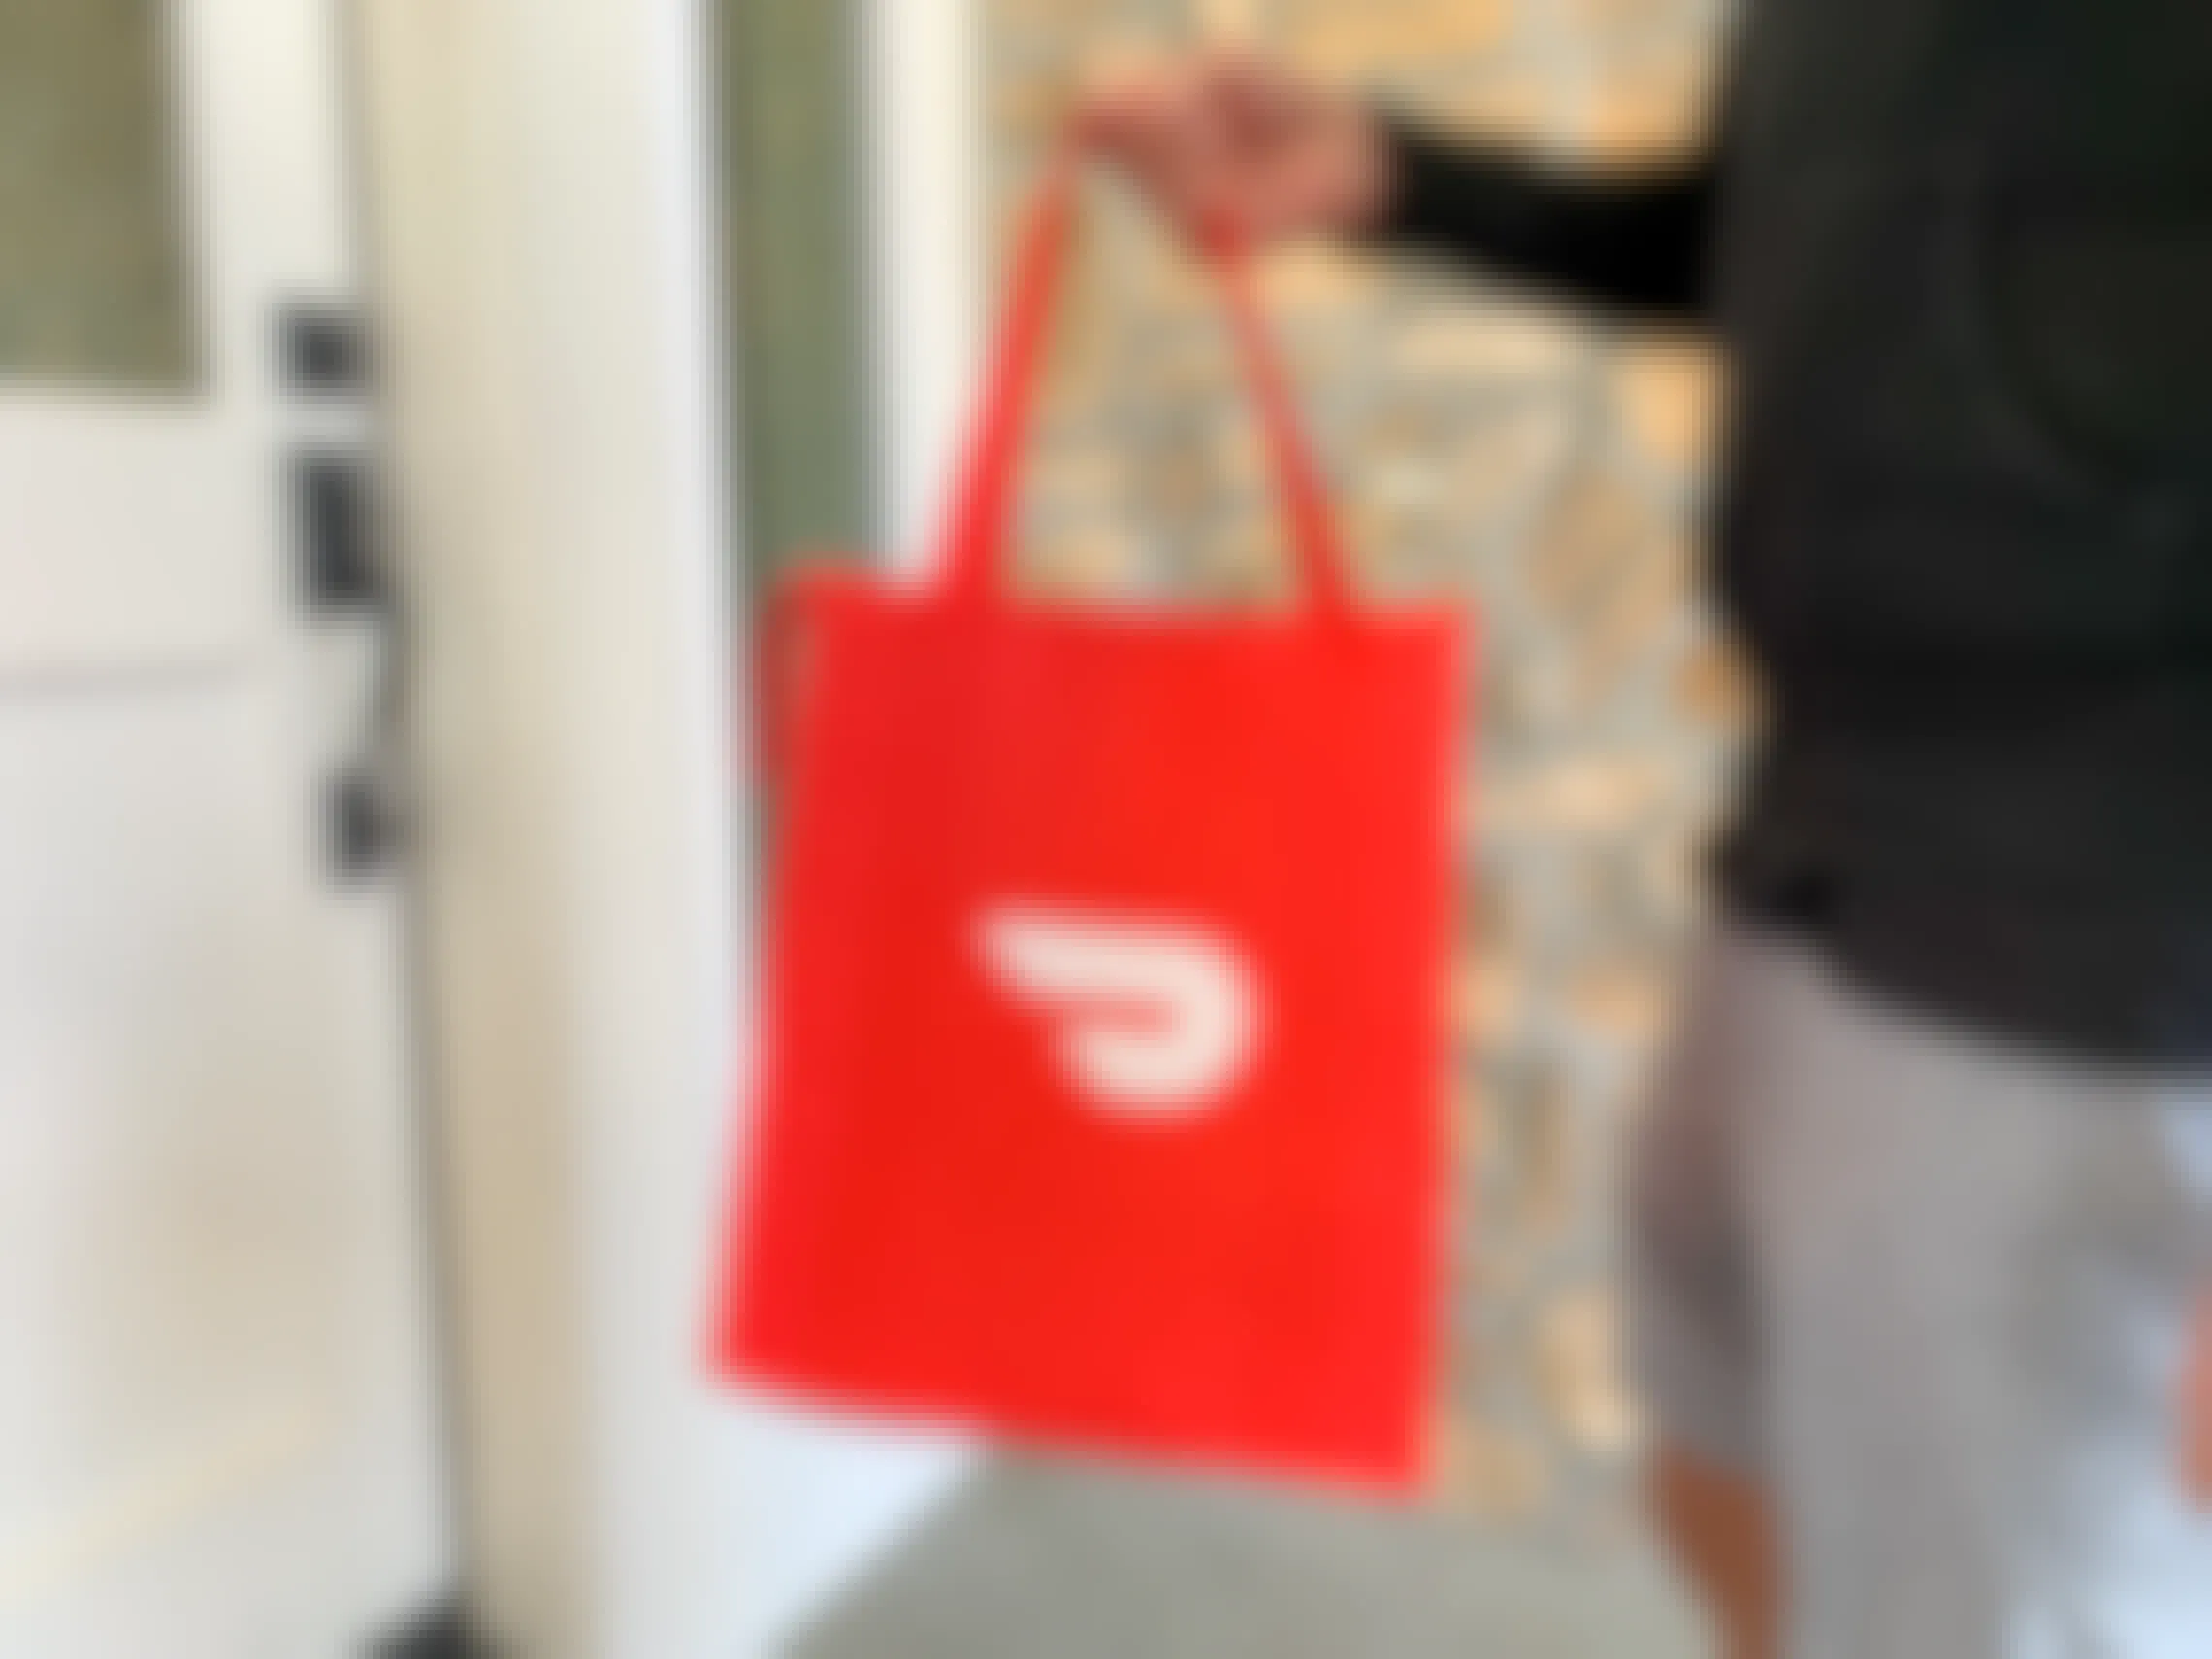 A man standing on a front porch delivering food in a doordash bag